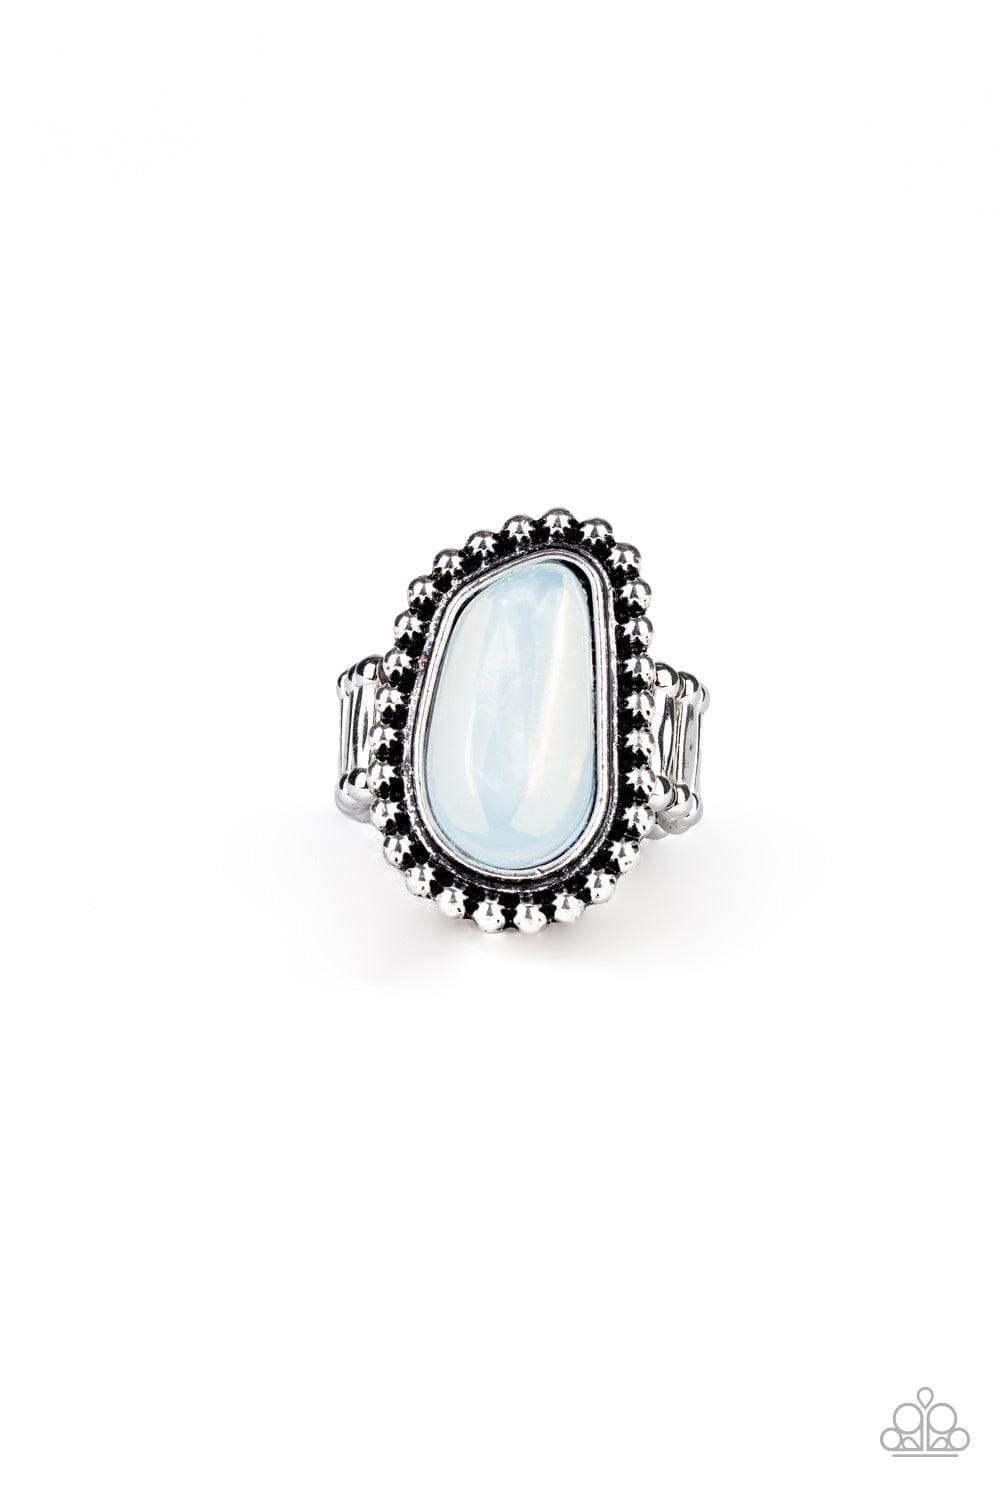 Paparazzi Accessories - For Ethereal! - White Ring - Bling by JessieK